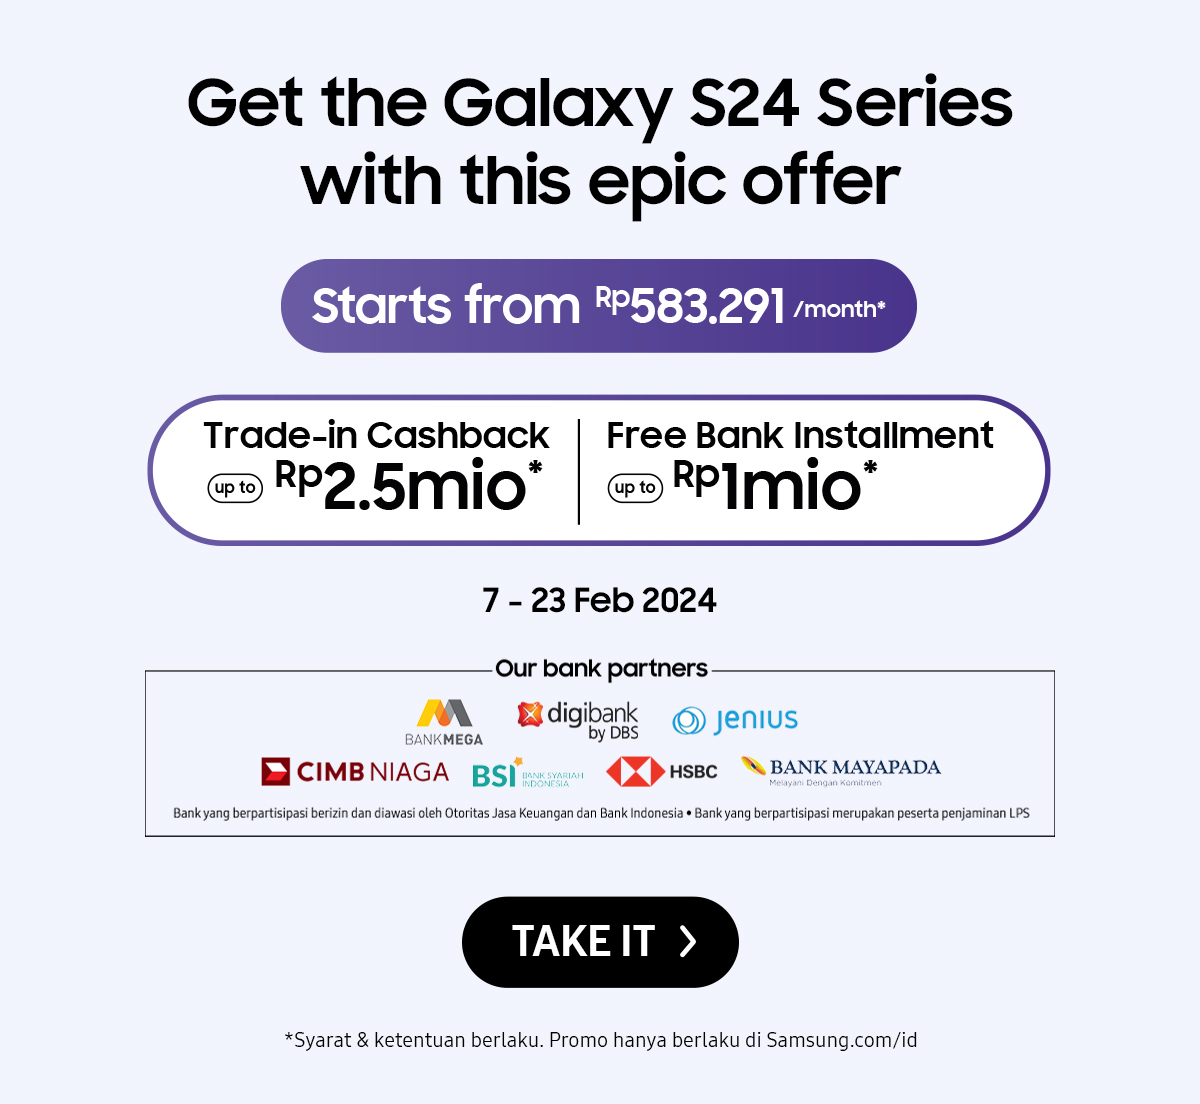 Get the Galaxy S24 Series with this epic offer